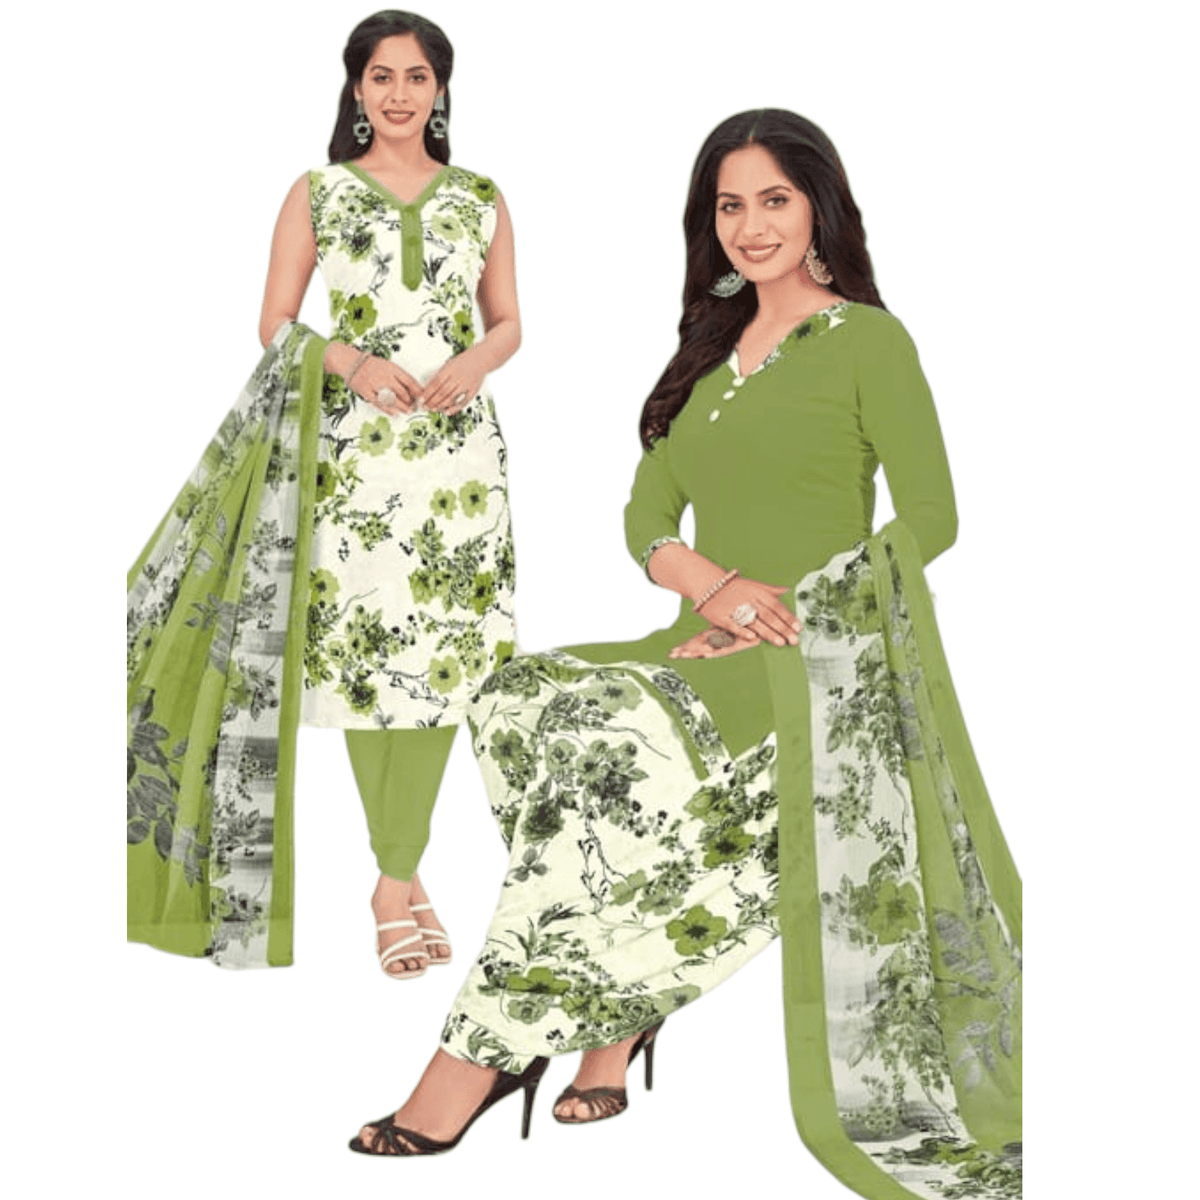 Natural Green Salwar Kameez with White Patiala with Dupatta on Sale Now at Bavis Clothing